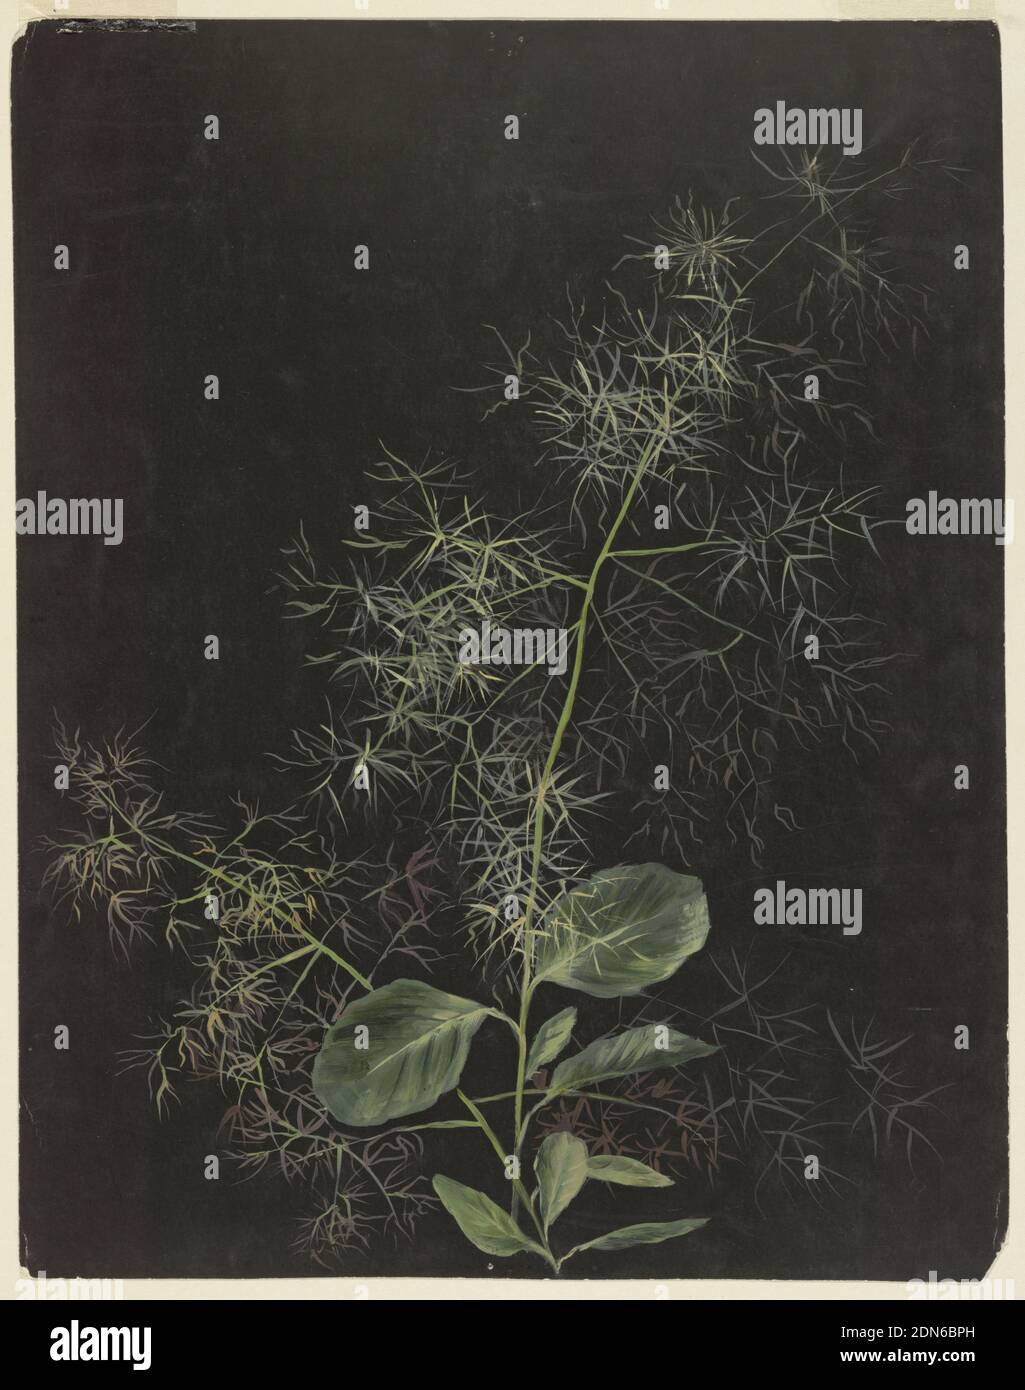 Study of Plant, Possibly Tufted Hairgrass, Sophia L. Crownfield, (American, 1862–1929), Brush and oil on black paper, Vertical sheet depicting grasses and leaves., USA, ca. 1890, nature studies, Drawing Stock Photo